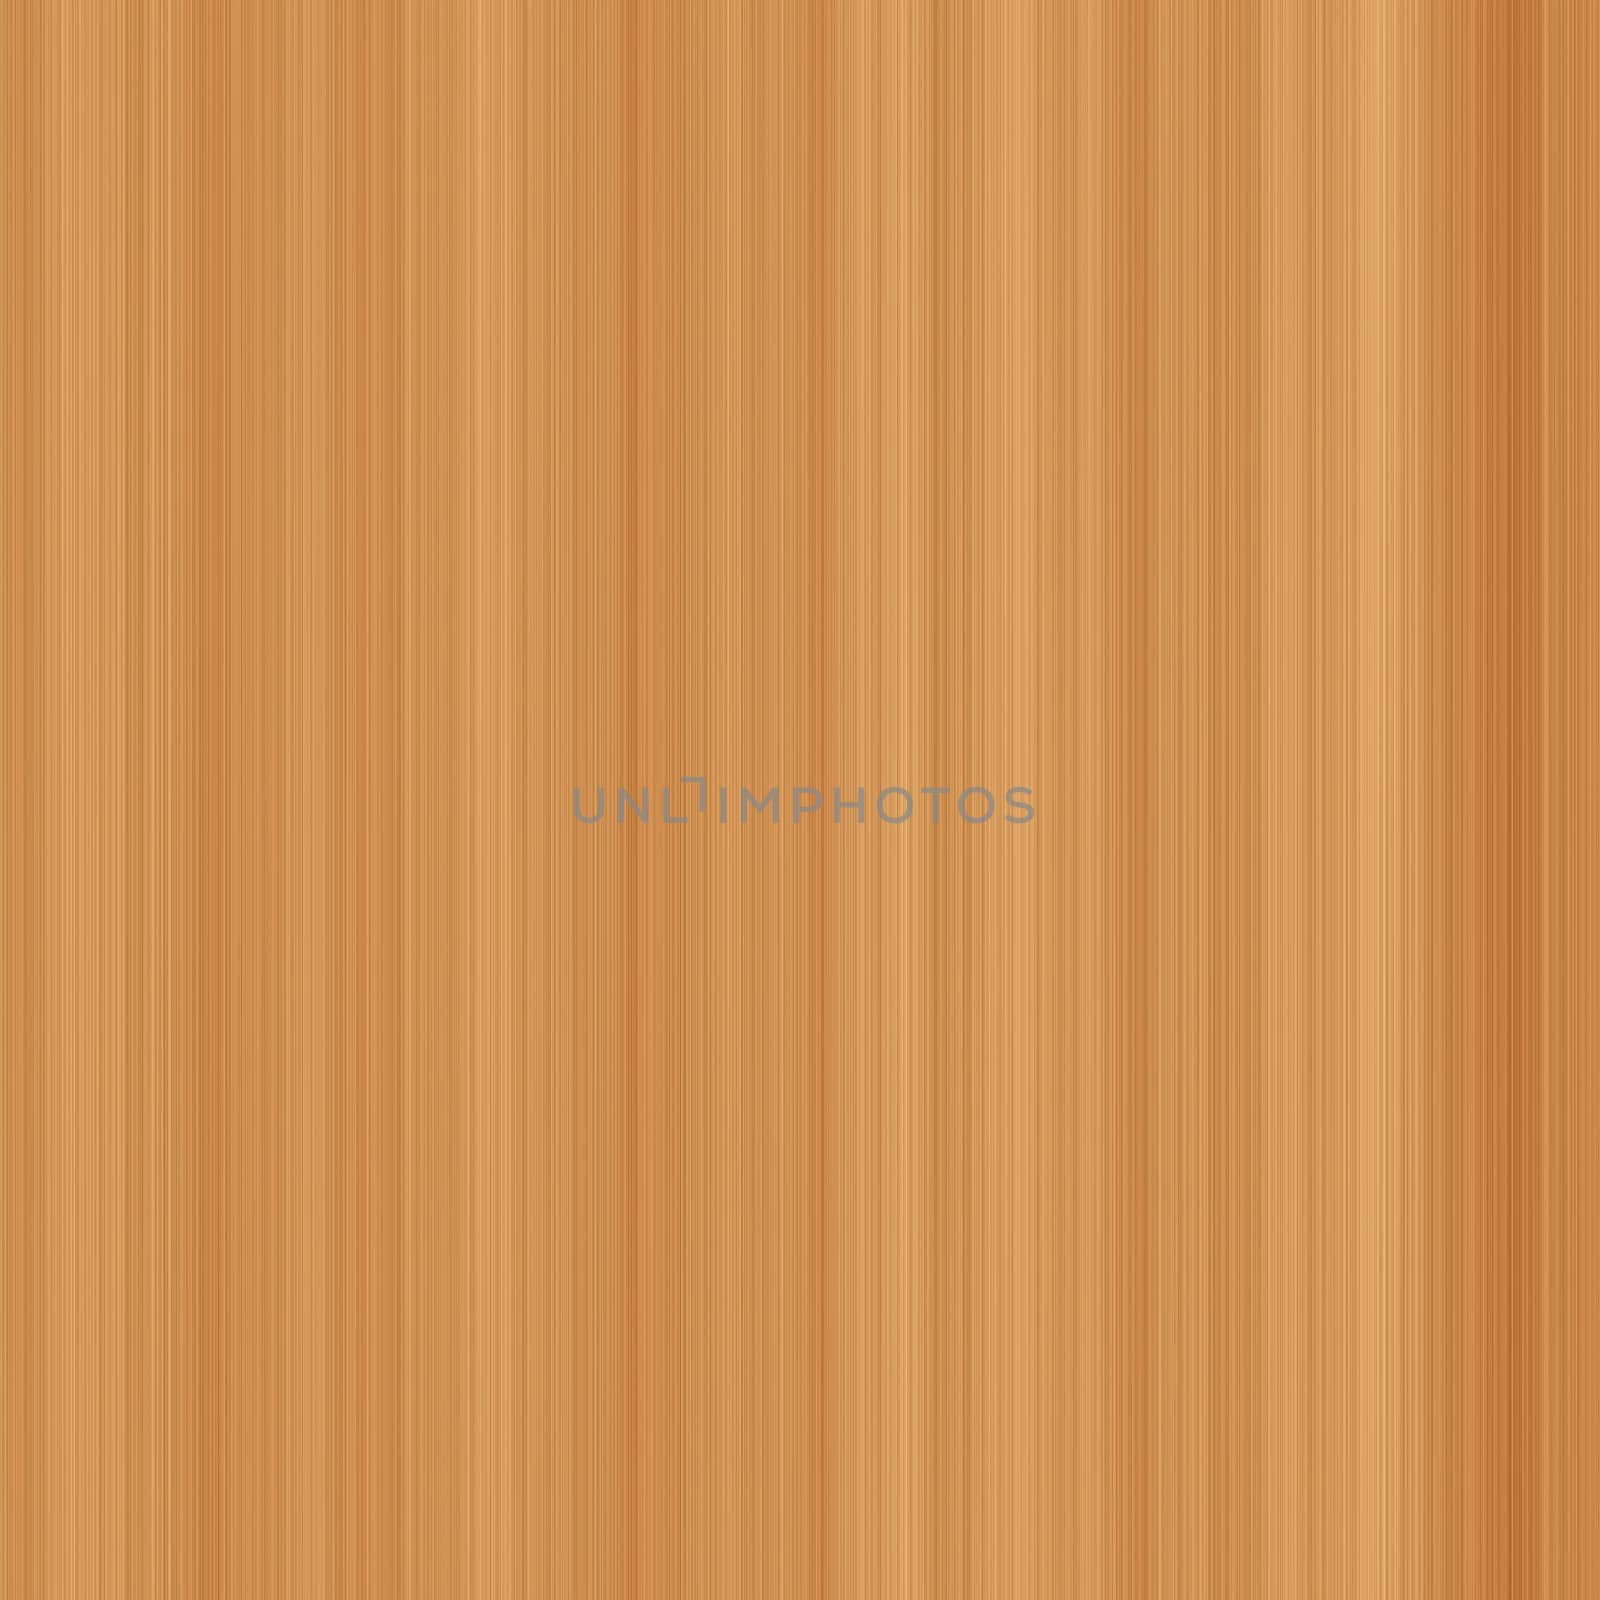 High resolution wood texture generated by computer. Tiled